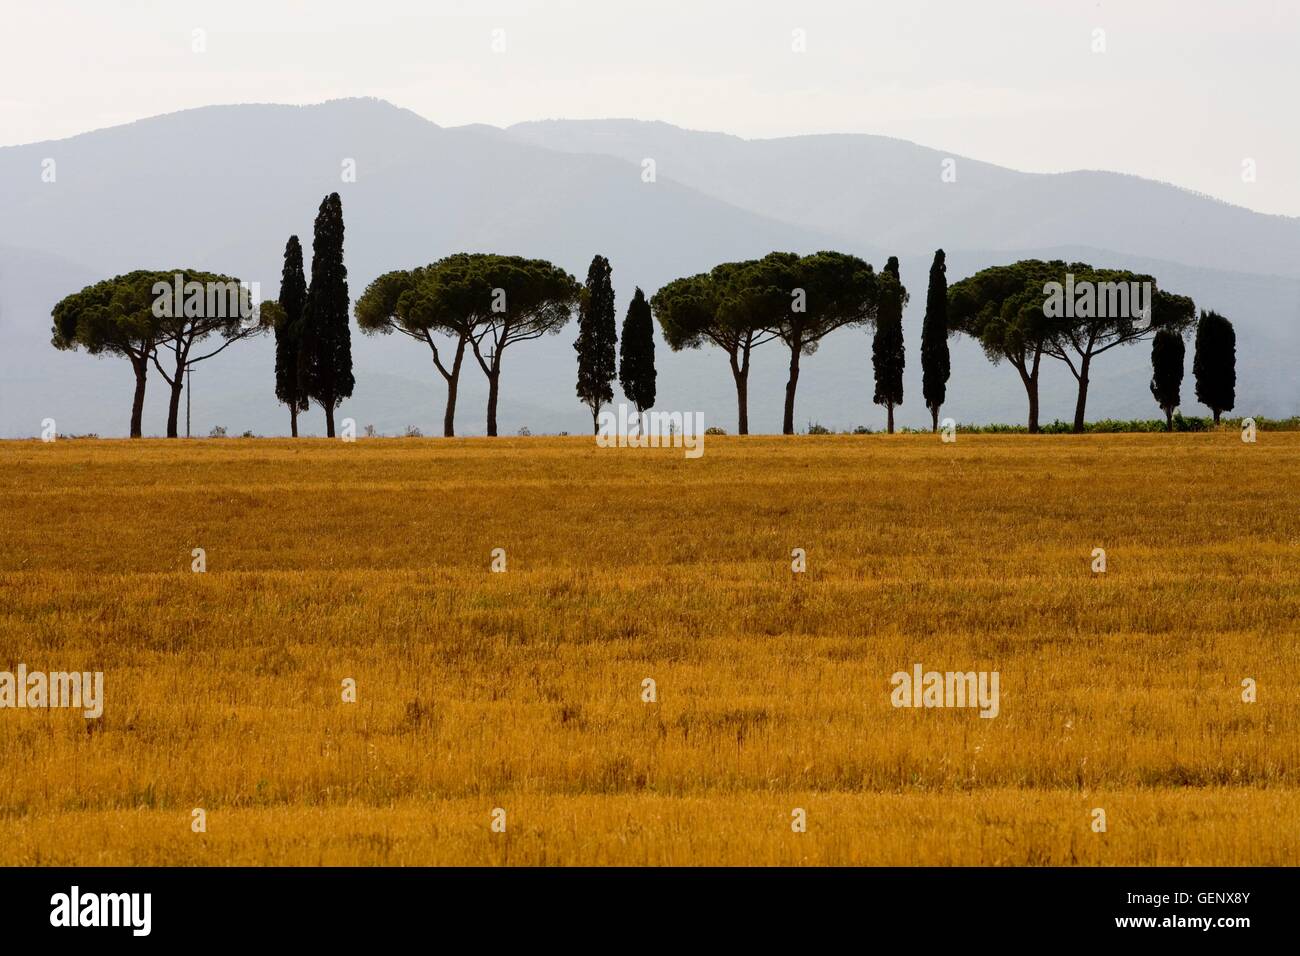 Avenue of cypresses and pines, Tuscany Stock Photo